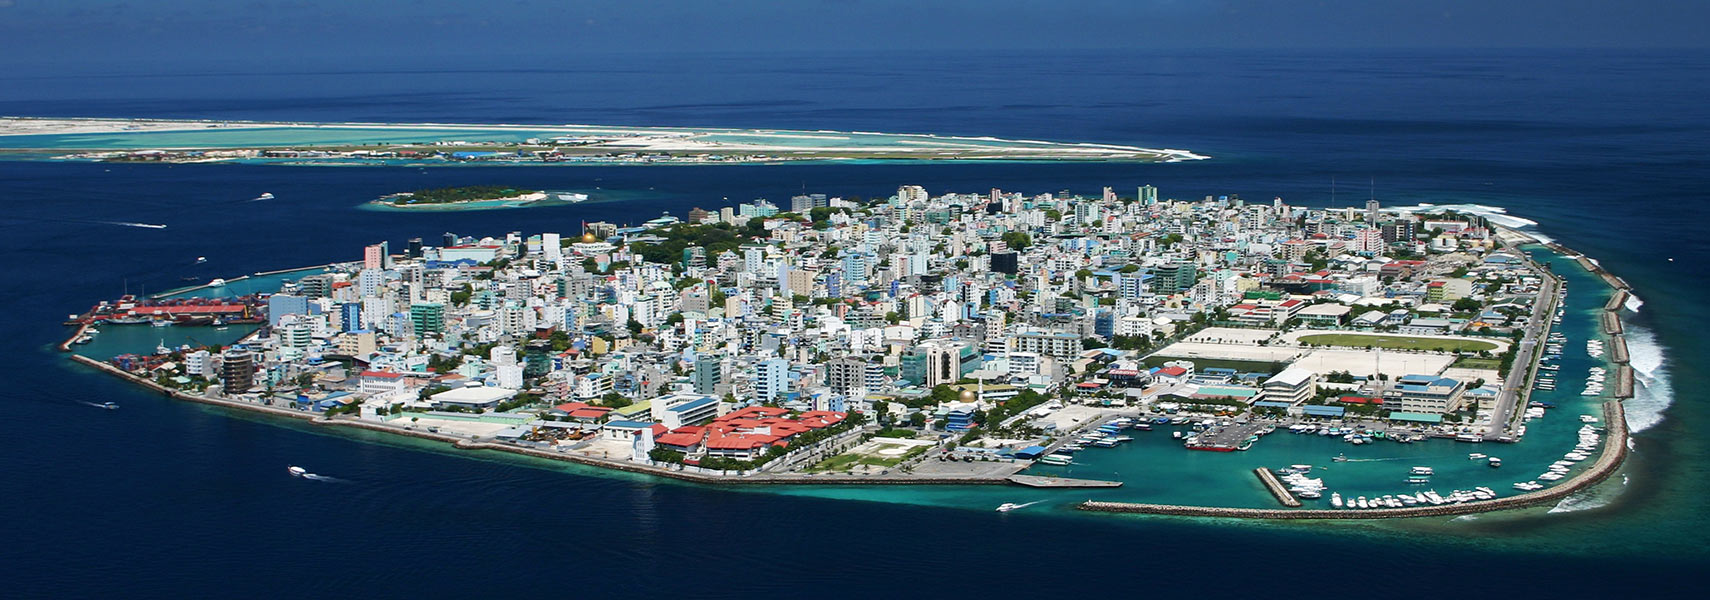 Malé island with the capital of the Maledives